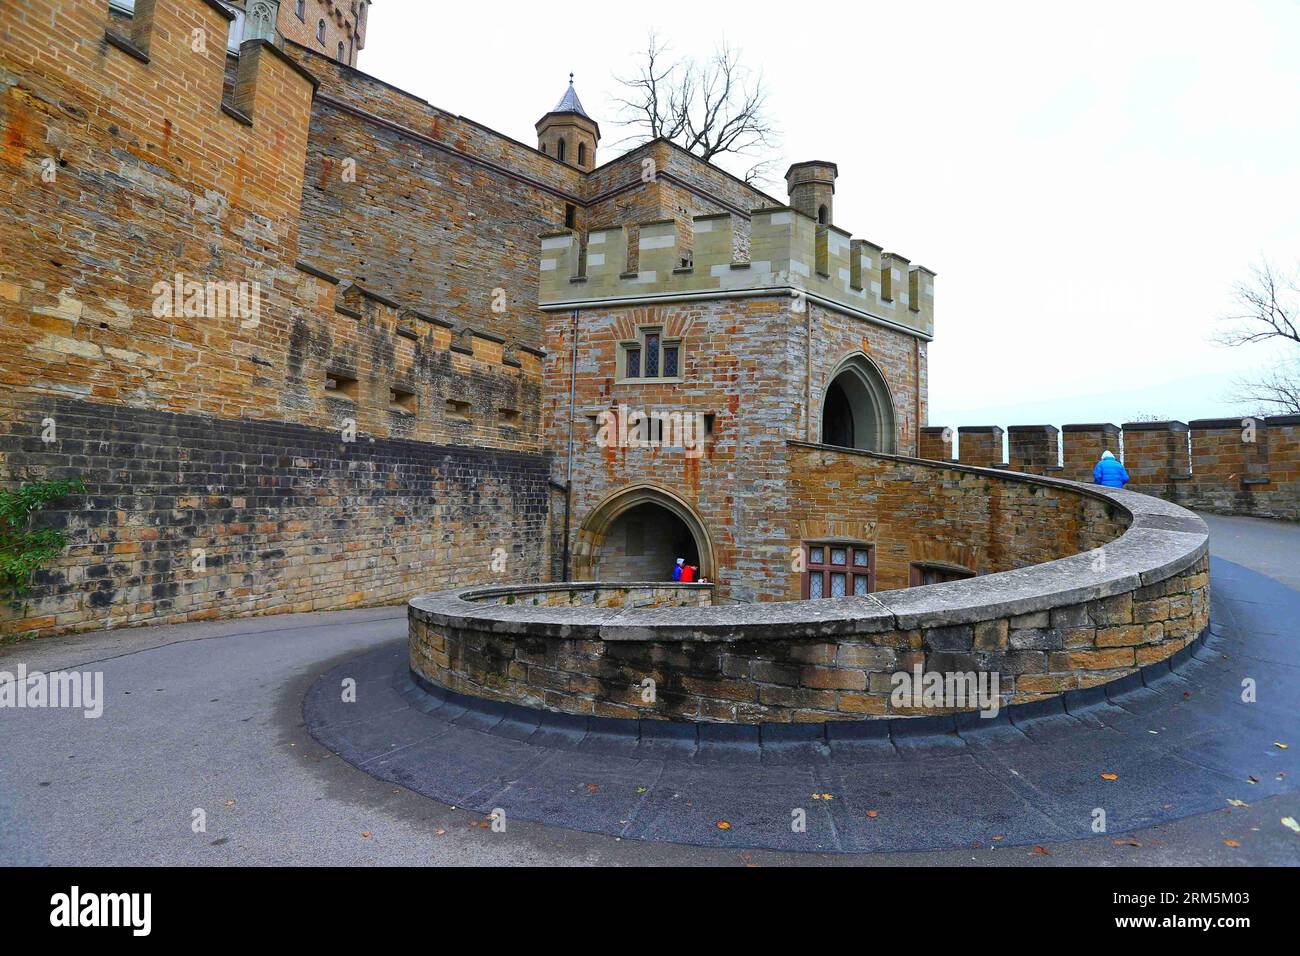 Bildnummer: 60684825  Datum: 02.11.2013  Copyright: imago/Xinhua Photo taken on Nov. 2, 2013 shows a part of the Burg Hohenzollern in Hechingen, Germany. Burg Hohenzollern is a castle considered to be the ancestral seat of the Hohenzollern family, which emerged in the Middle Ages and eventually became German Emperors. The castle was first constructed in the early 11th century and completely destroyed in 1423. The current version of the castle was rebuilt in mid-19th century. The castle becomes a popular tourist destination today as it is still privately owned by the descendants of the Hohenzol Stock Photo